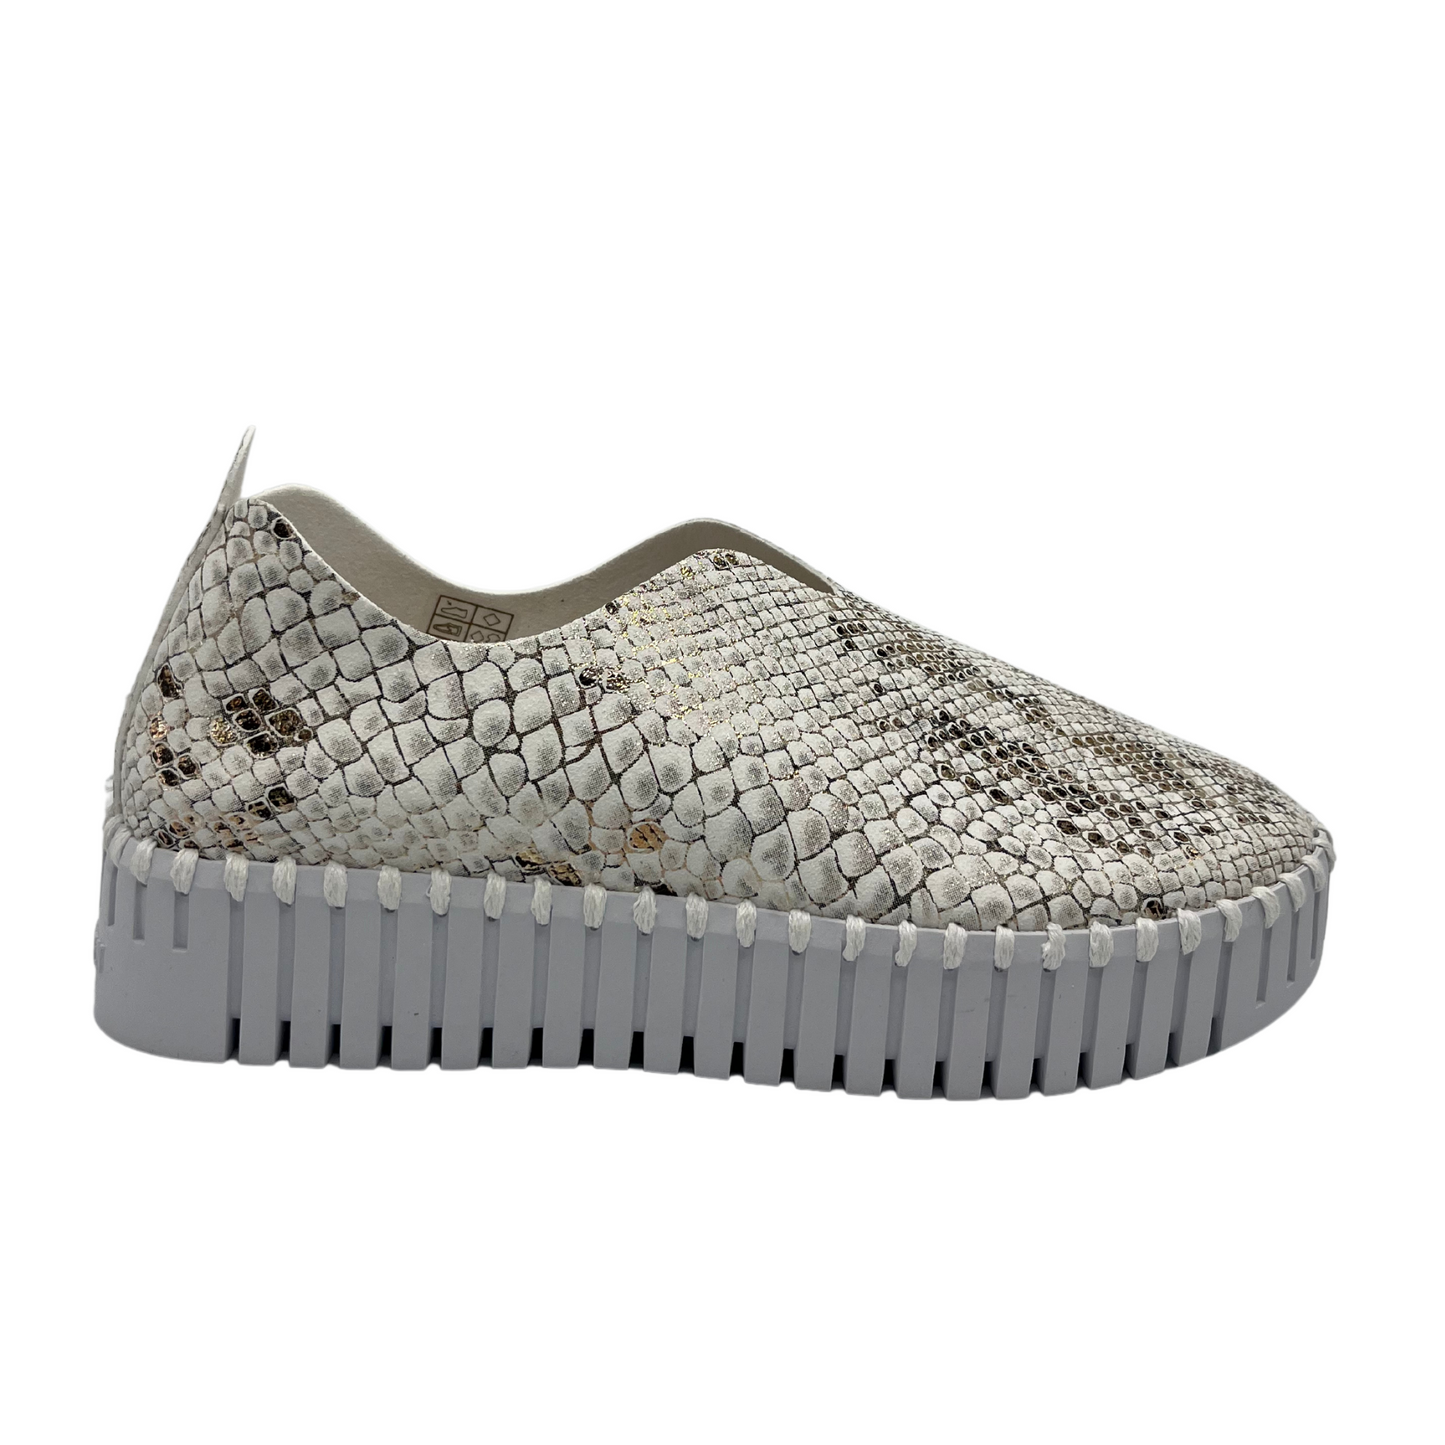 Right facing view of leather snake print sneaker with platform white rubber outsole